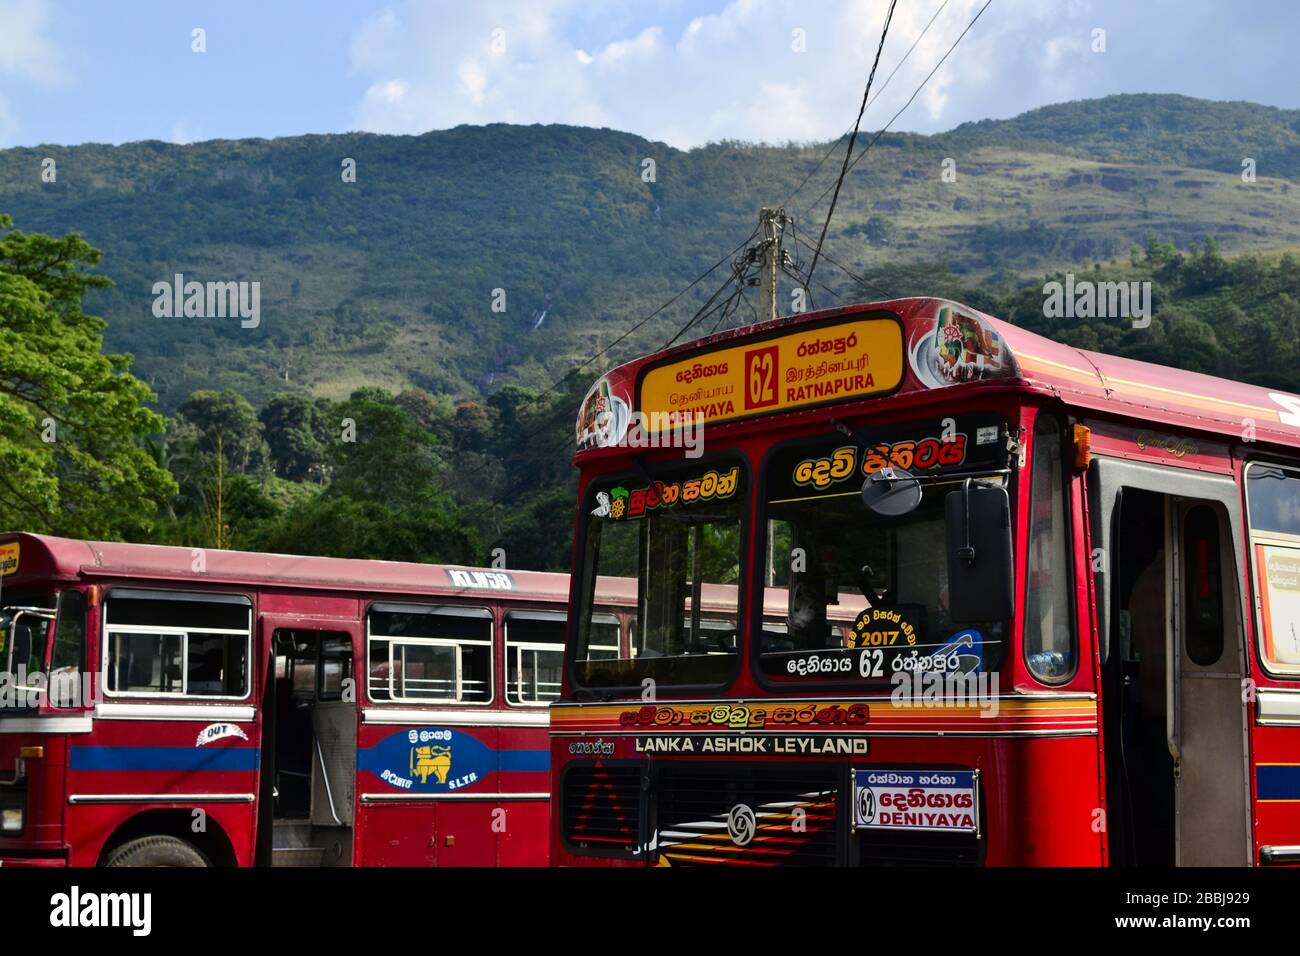 Sri Lanka - March, 2017: Red buses on a bus station on the background of mountains. Ashok Leyland Indian vehicle Stock Photo